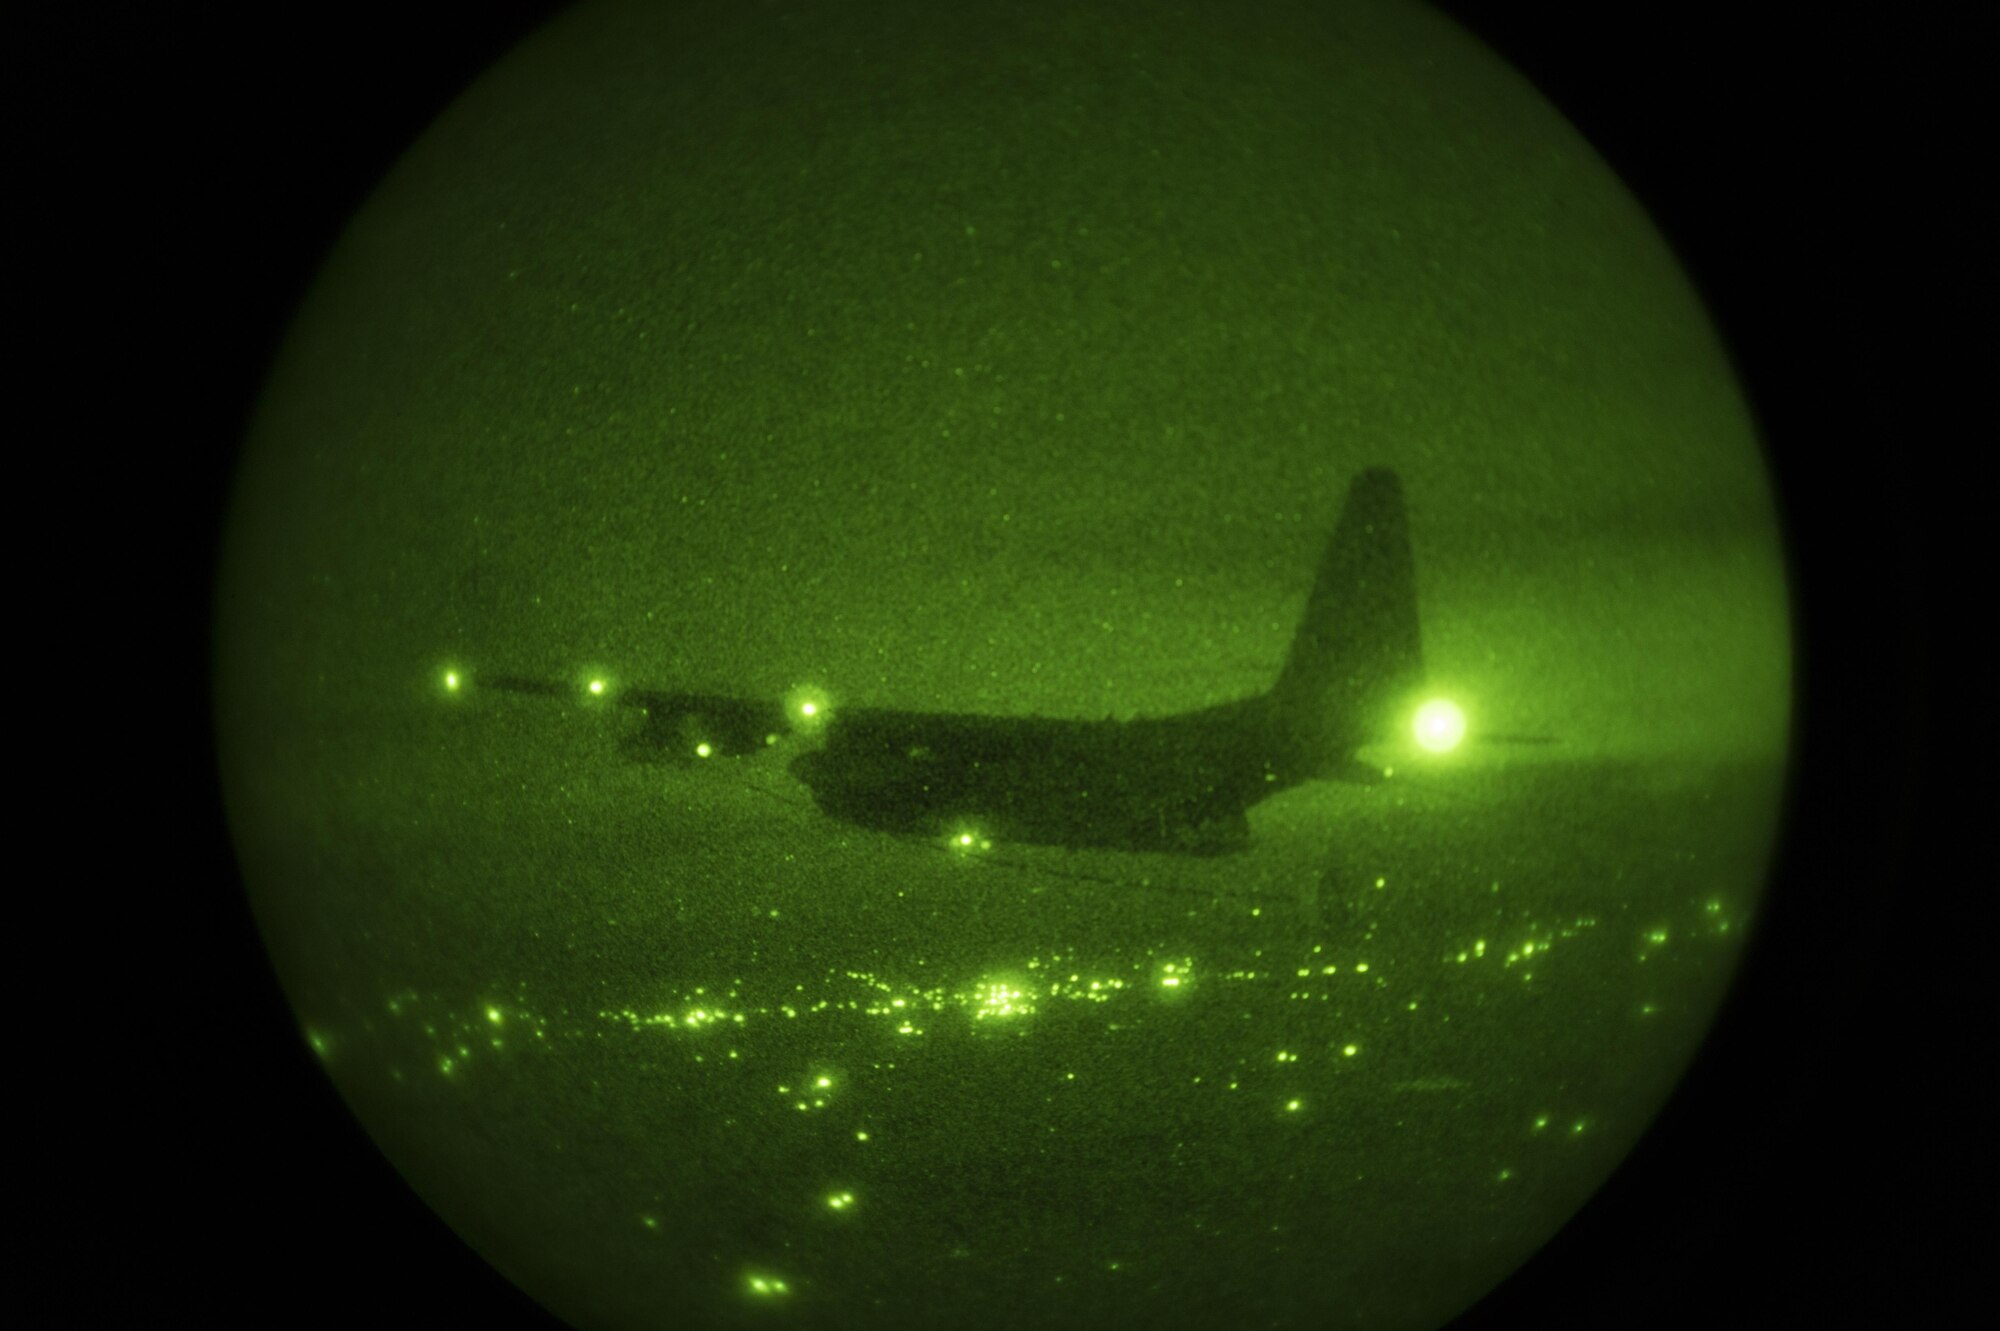 A 15th Special Operations Squadron MC-130H Combat Talon II conducts an air-to-air refueling mission during Total Force Exercise 17-3 above Indiana, July 9, 2017. The Combat Talon II refueled three 8th SOS CV-22s during the mission, training on a vital capability to guarantee Air Force Special Operations Command's global reach capability. (U.S. Air Force photo by Airman 1st Class Joseph Pick)